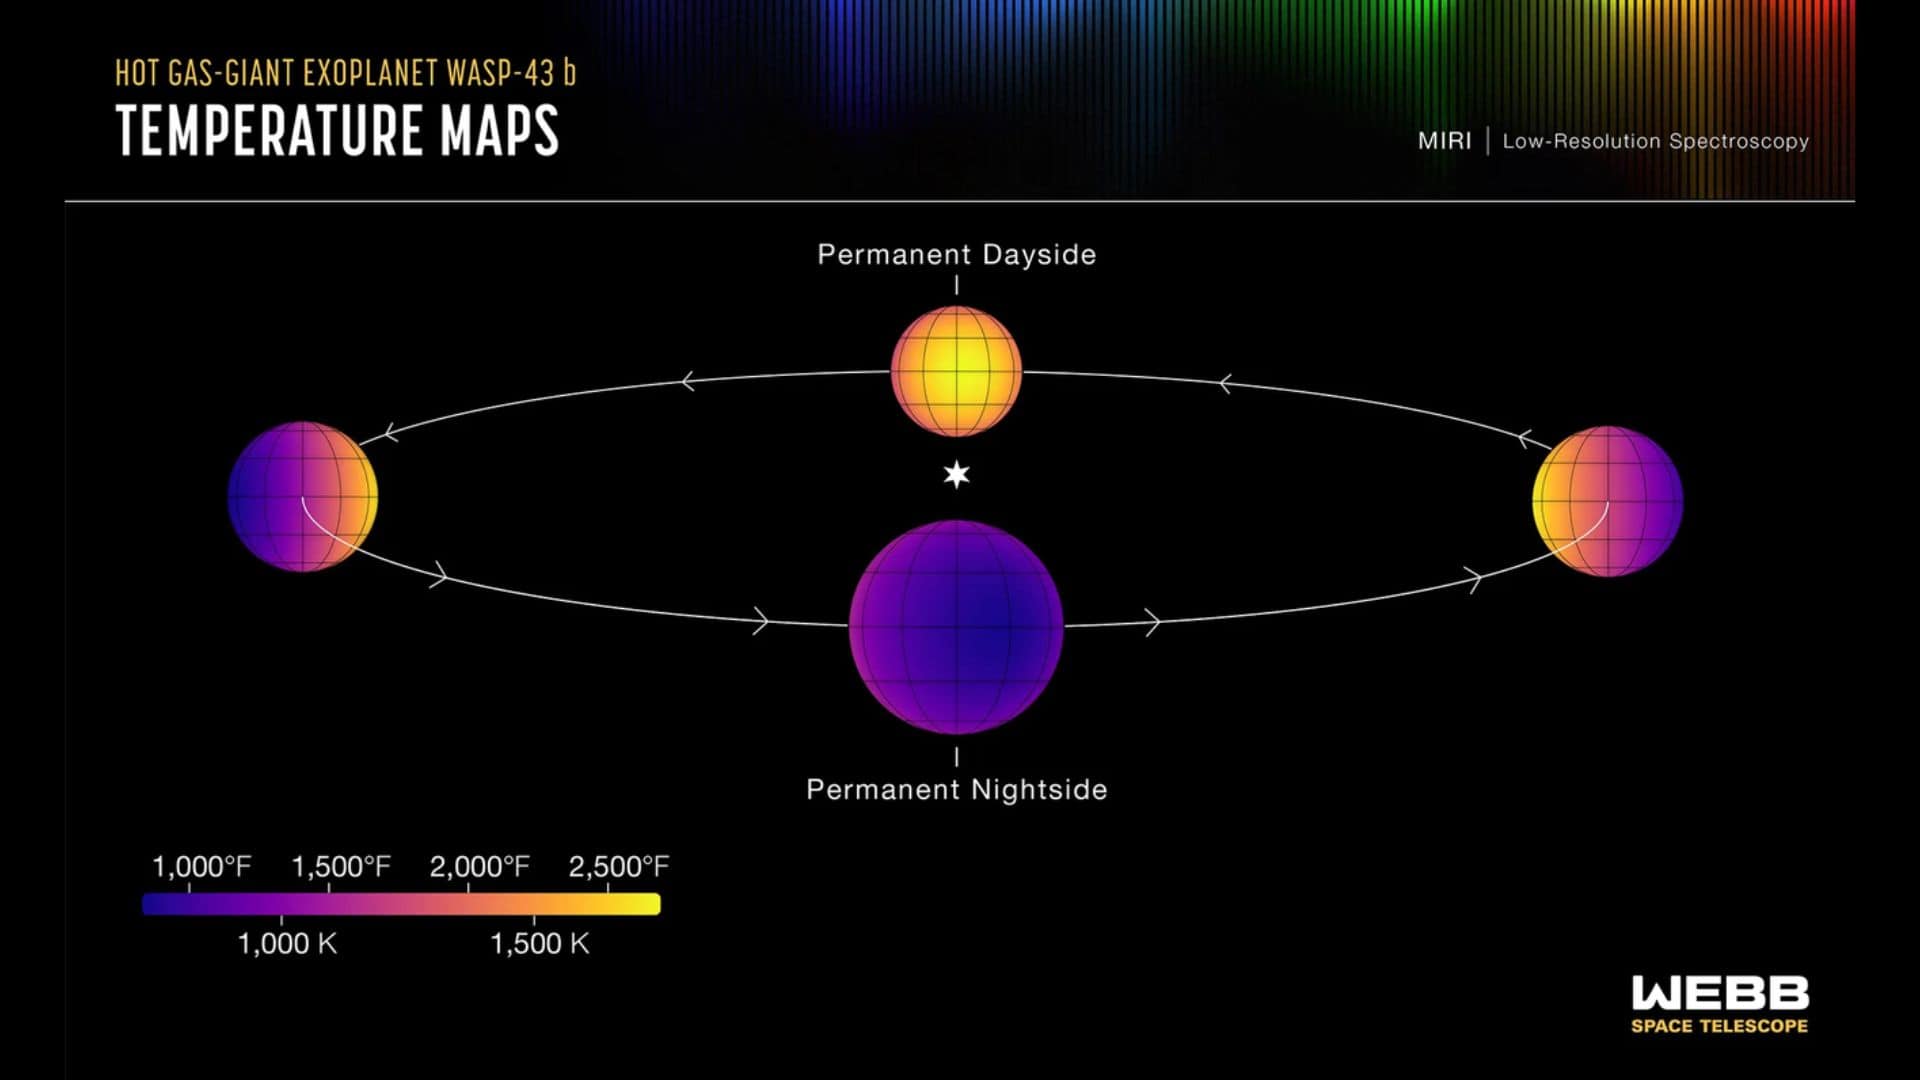 Temperature maps of the exoplanet WASP-43 b based on the observations of Webb’s MIRI (the Mid-Infrared Instrument)